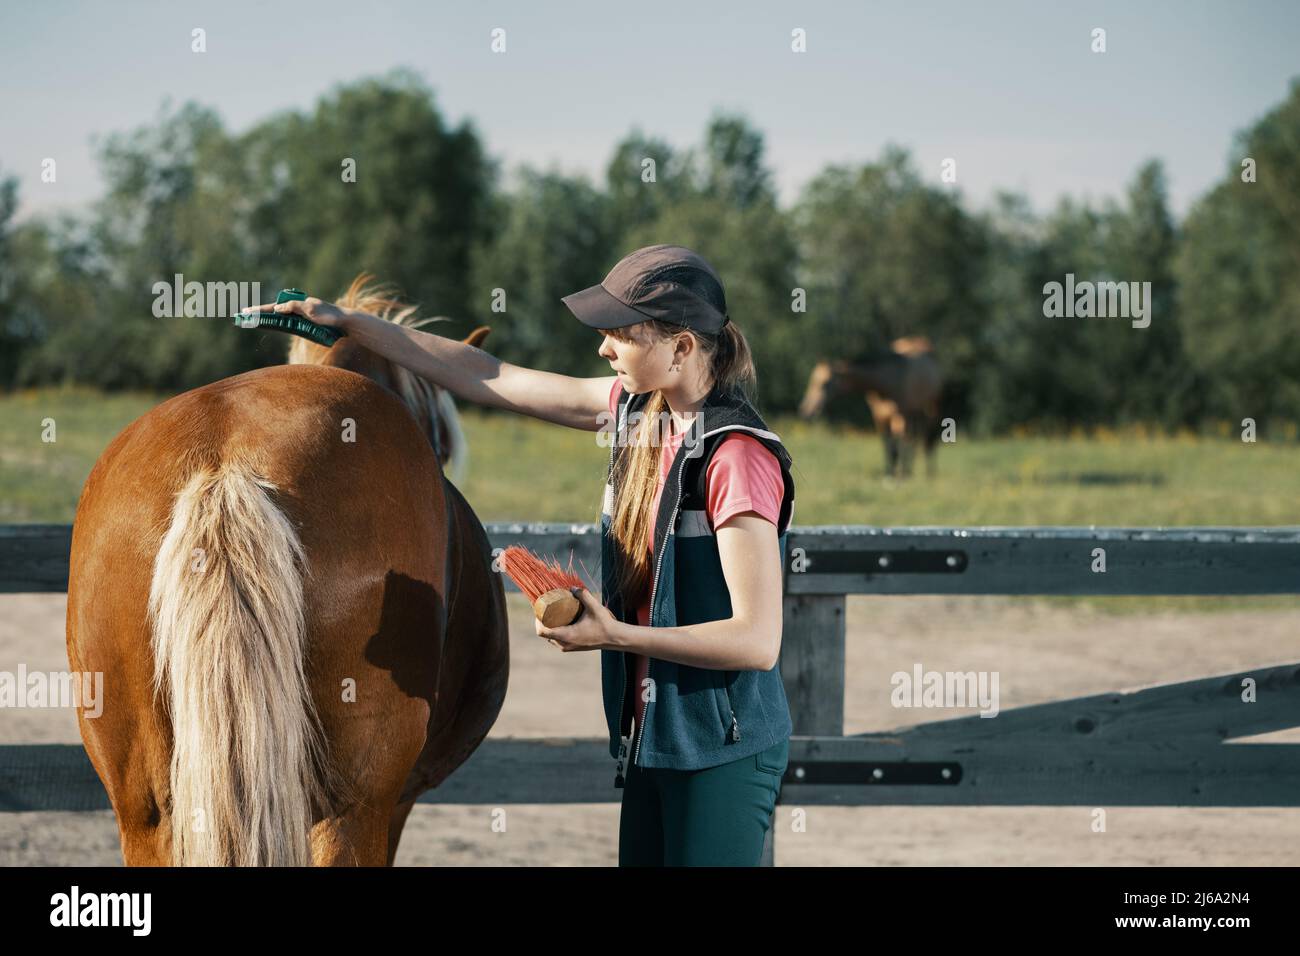 Teenage girl grooming horse with curry comb in outdoors. Stock Photo